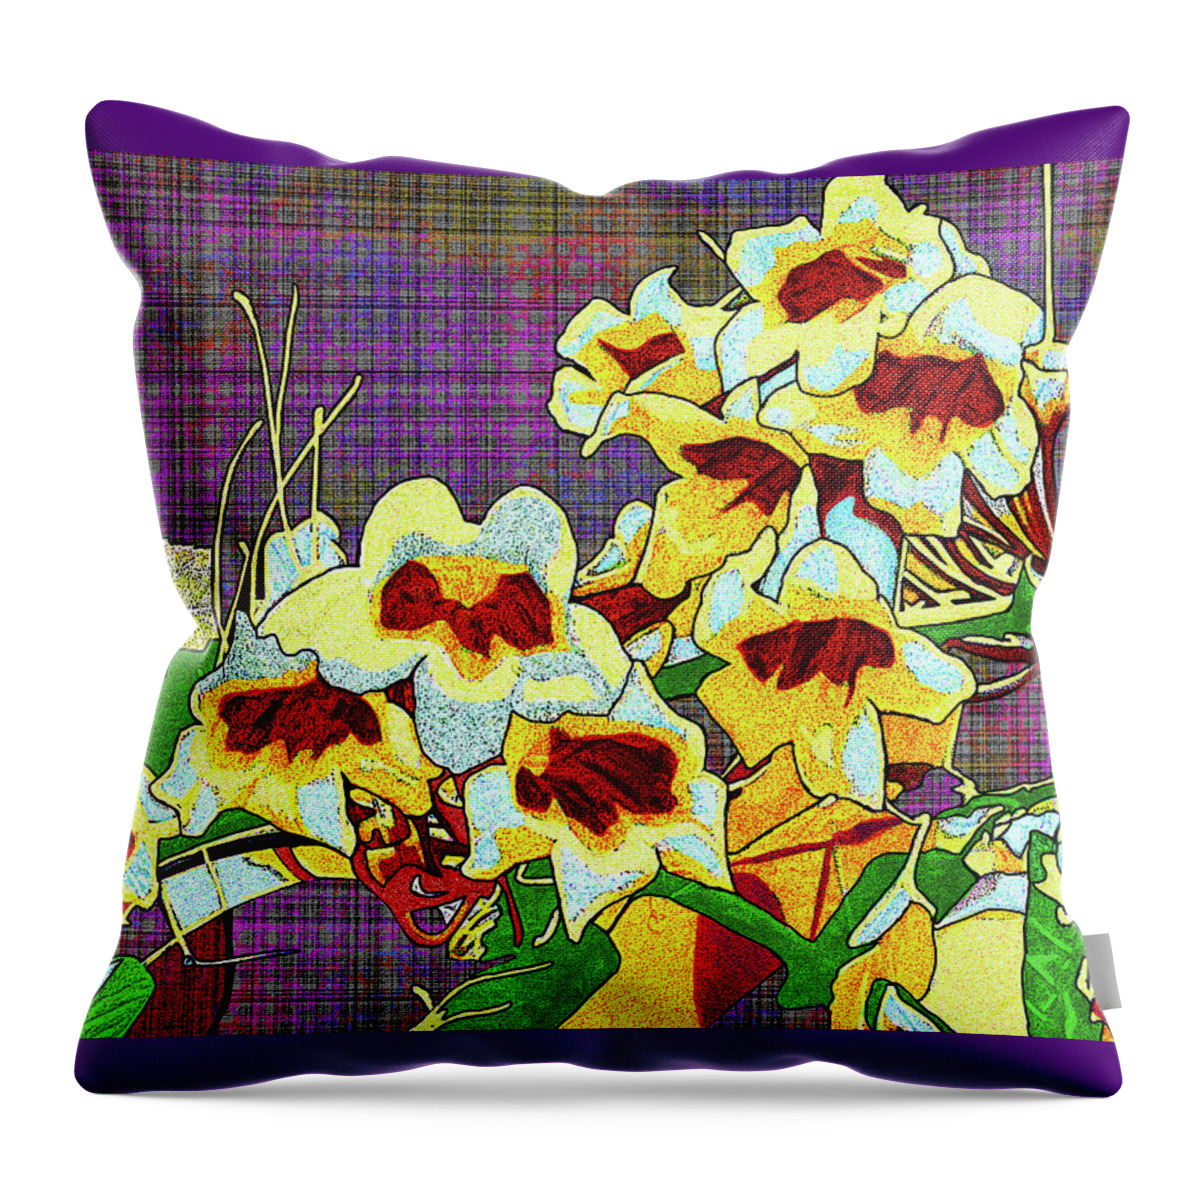 Macon Throw Pillow featuring the digital art Trumpet Flowers At Ocmulgee by Rod Whyte